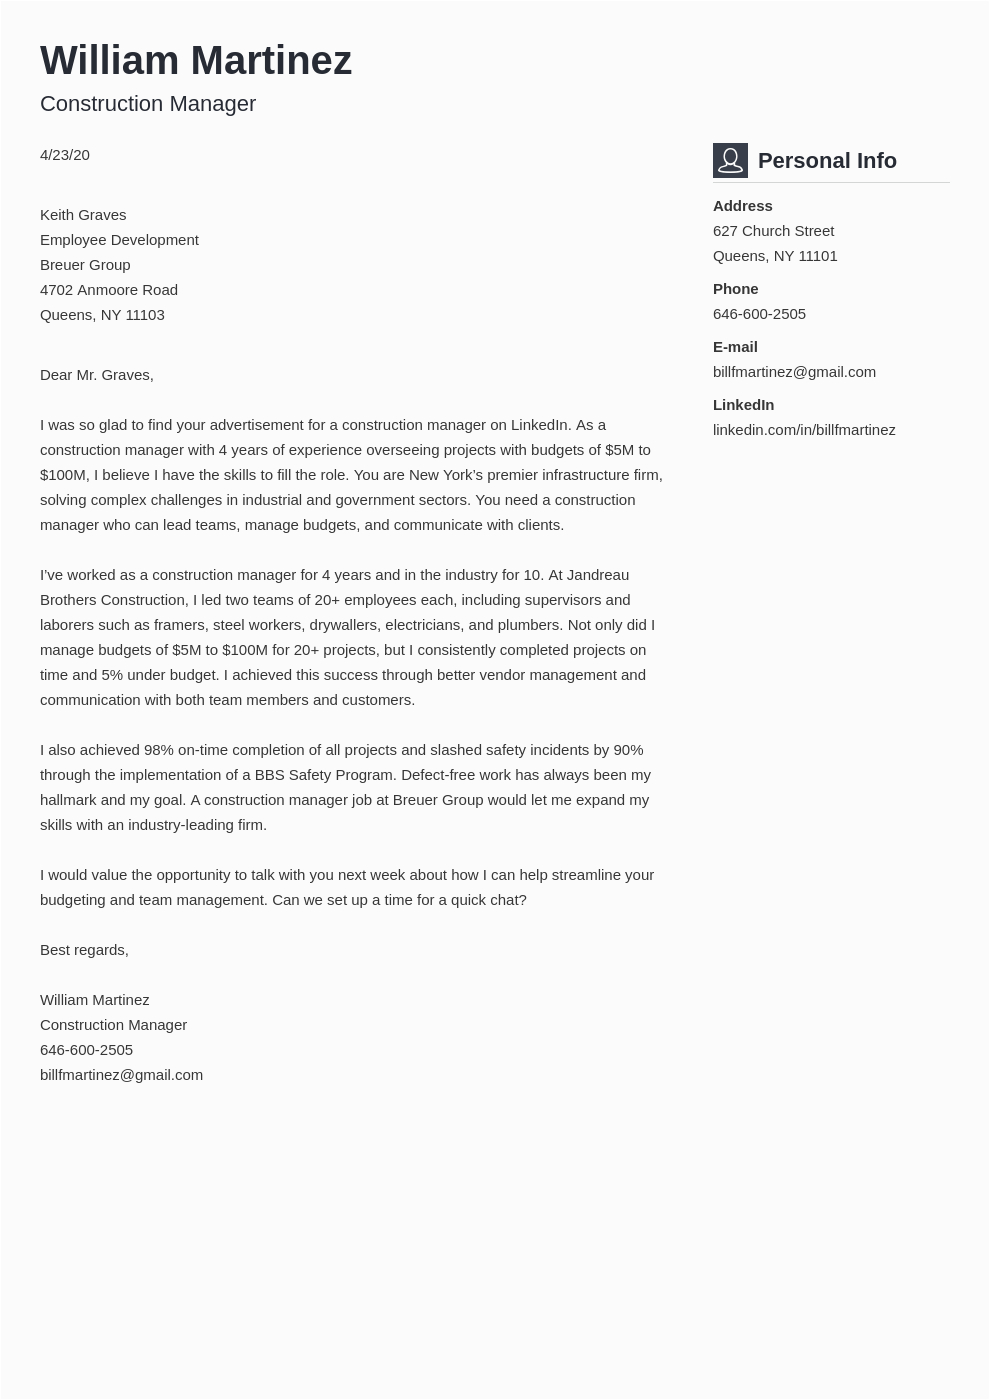 Construction Resume Cover Letter Free Samples Construction Cover Letter Examples & Writing Guide